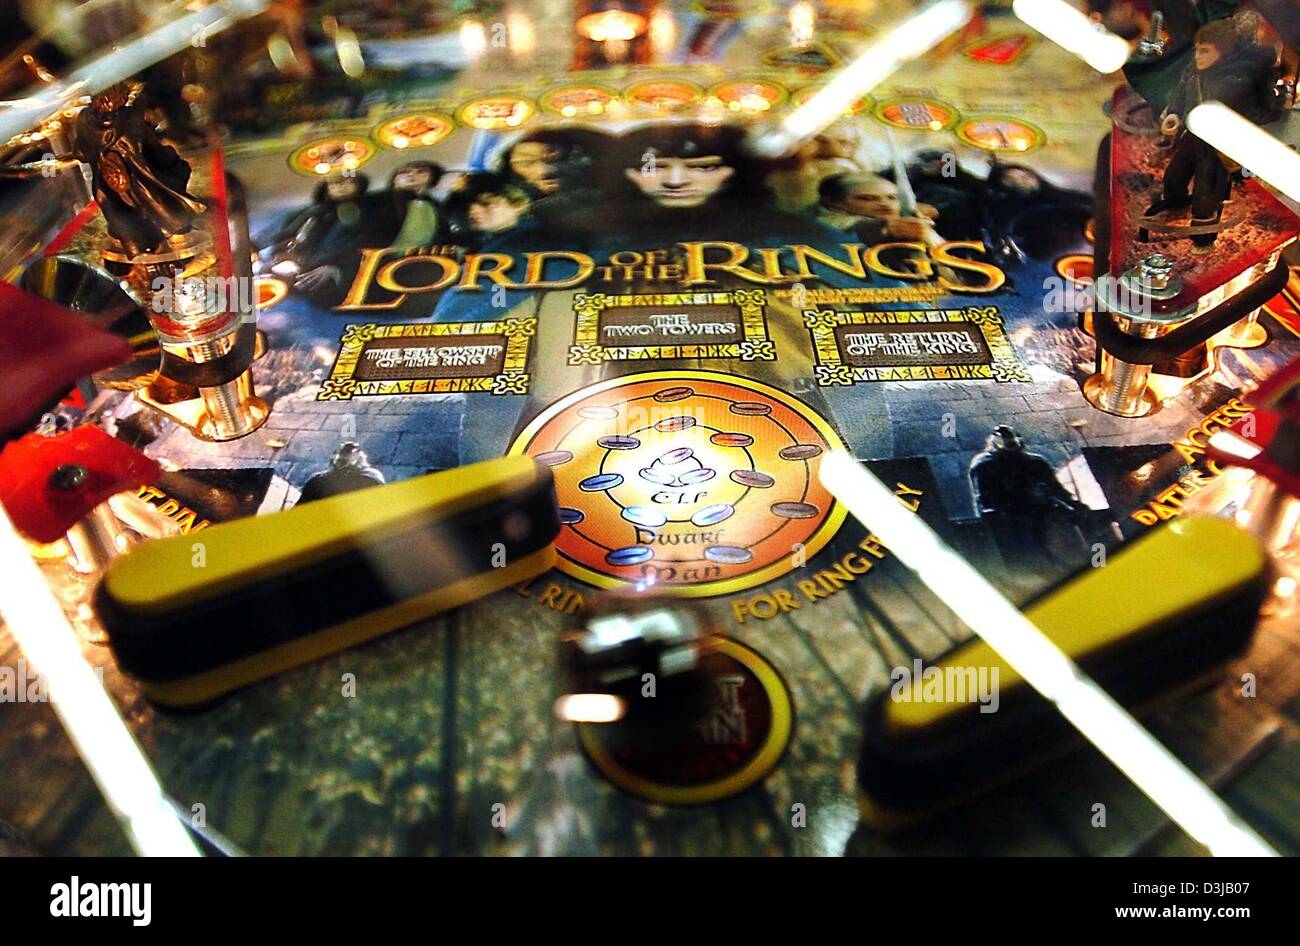 (dpa) - A flipper machine displays a design with the theme of 'The Lord of the Rings' at the 24th international fair for entertainment and vending machines (IMA) at the fair centrre in Nuremberg, Germany, 21 January 2004. The German entertainment and vending machines industry is hoping for growth in the market after a decade of massive losses in market shares. Stock Photo